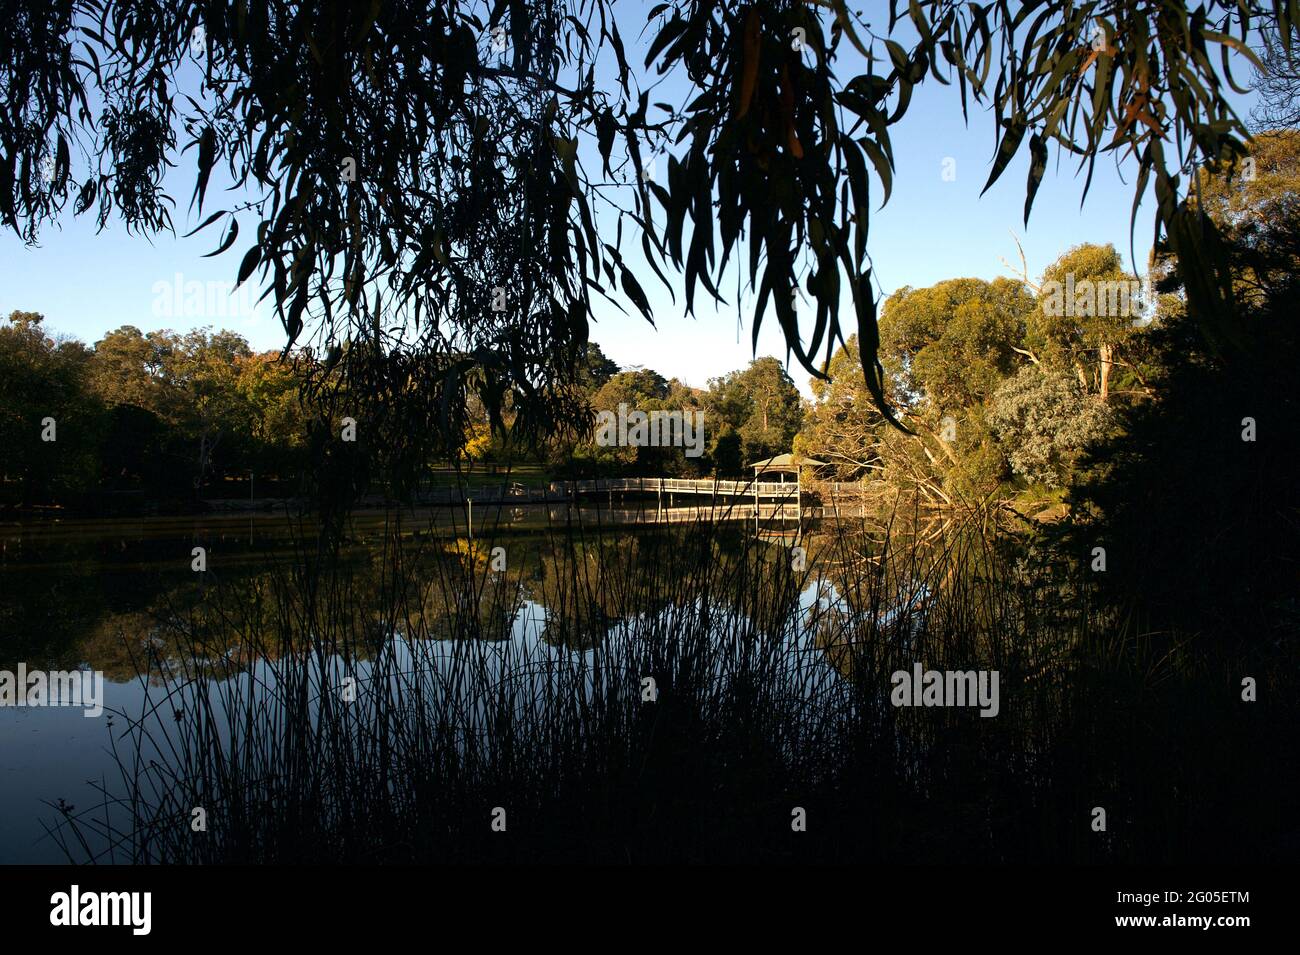 The wooden bridge and shelter from across the water, in Autumn sun, at Ringwood Lake in the City of Maroondah in Victoria, Australia. Stock Photo